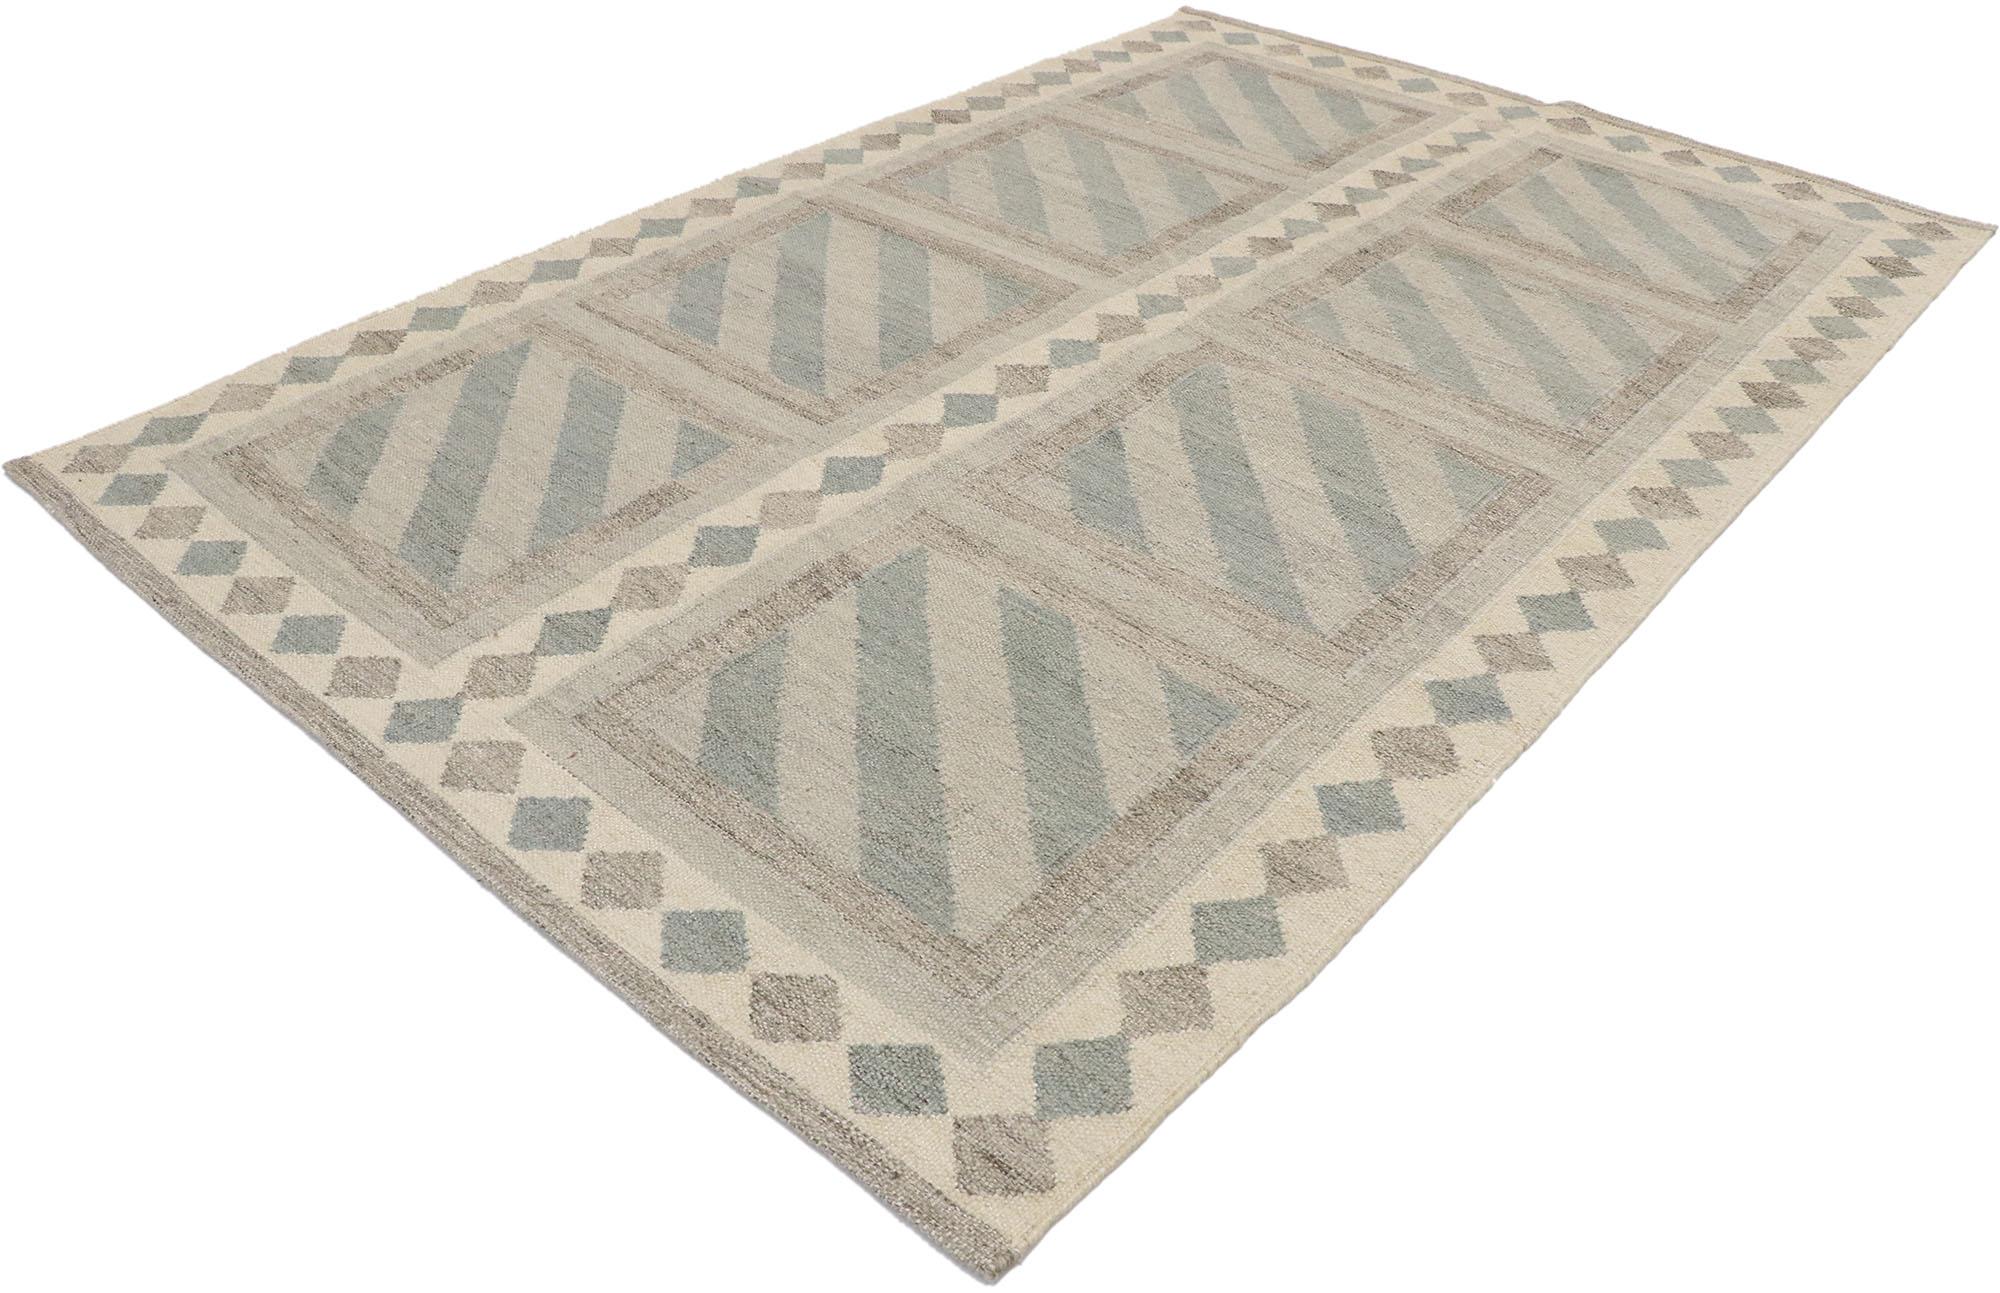 30596 New Contemporary Swedish Inspired Kilim rug with Scandinavian Modern style. Displaying a simple geometric pattern and clean lines, this handwoven wool contemporary Swedish inspired kilim rug beautifully embodies Scandinavian Modern style. The